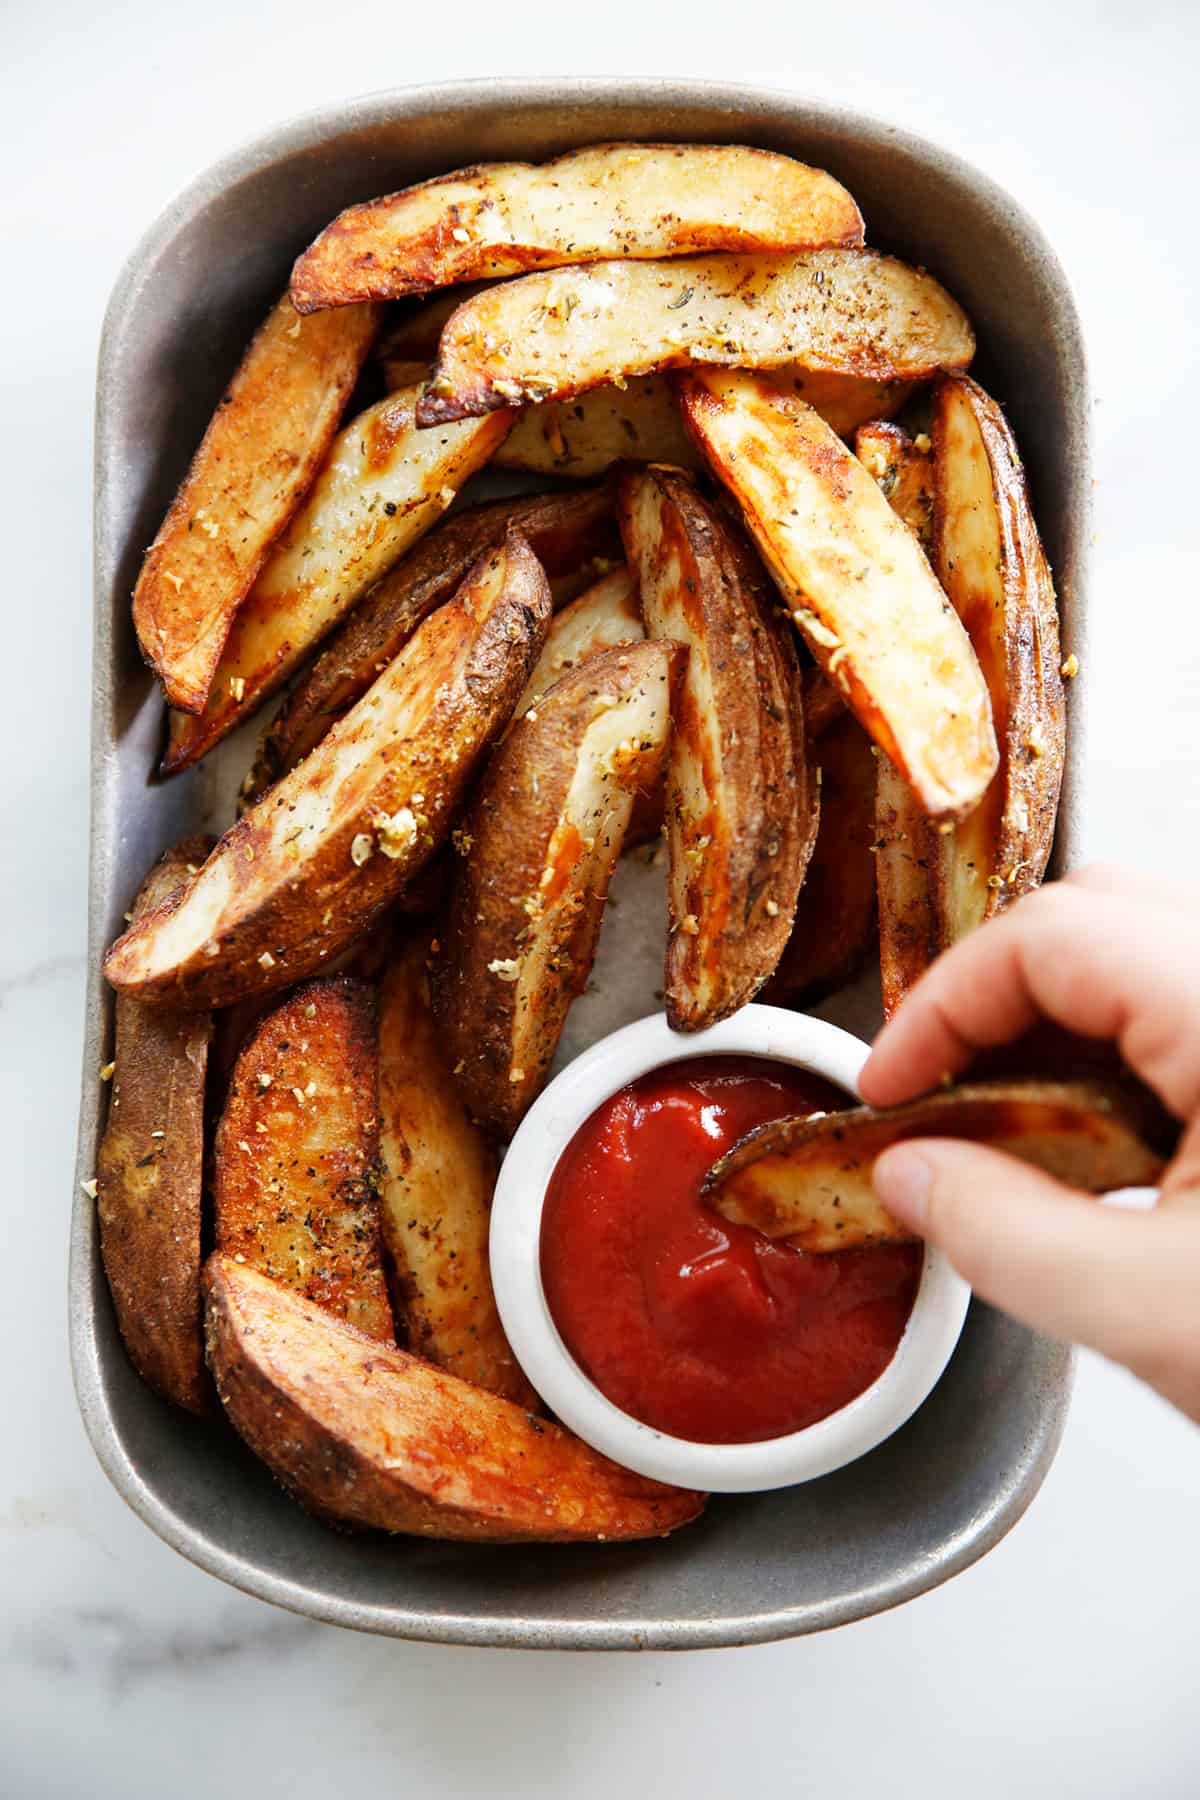 Roasted potato wedges on a serving platter with ketchup.